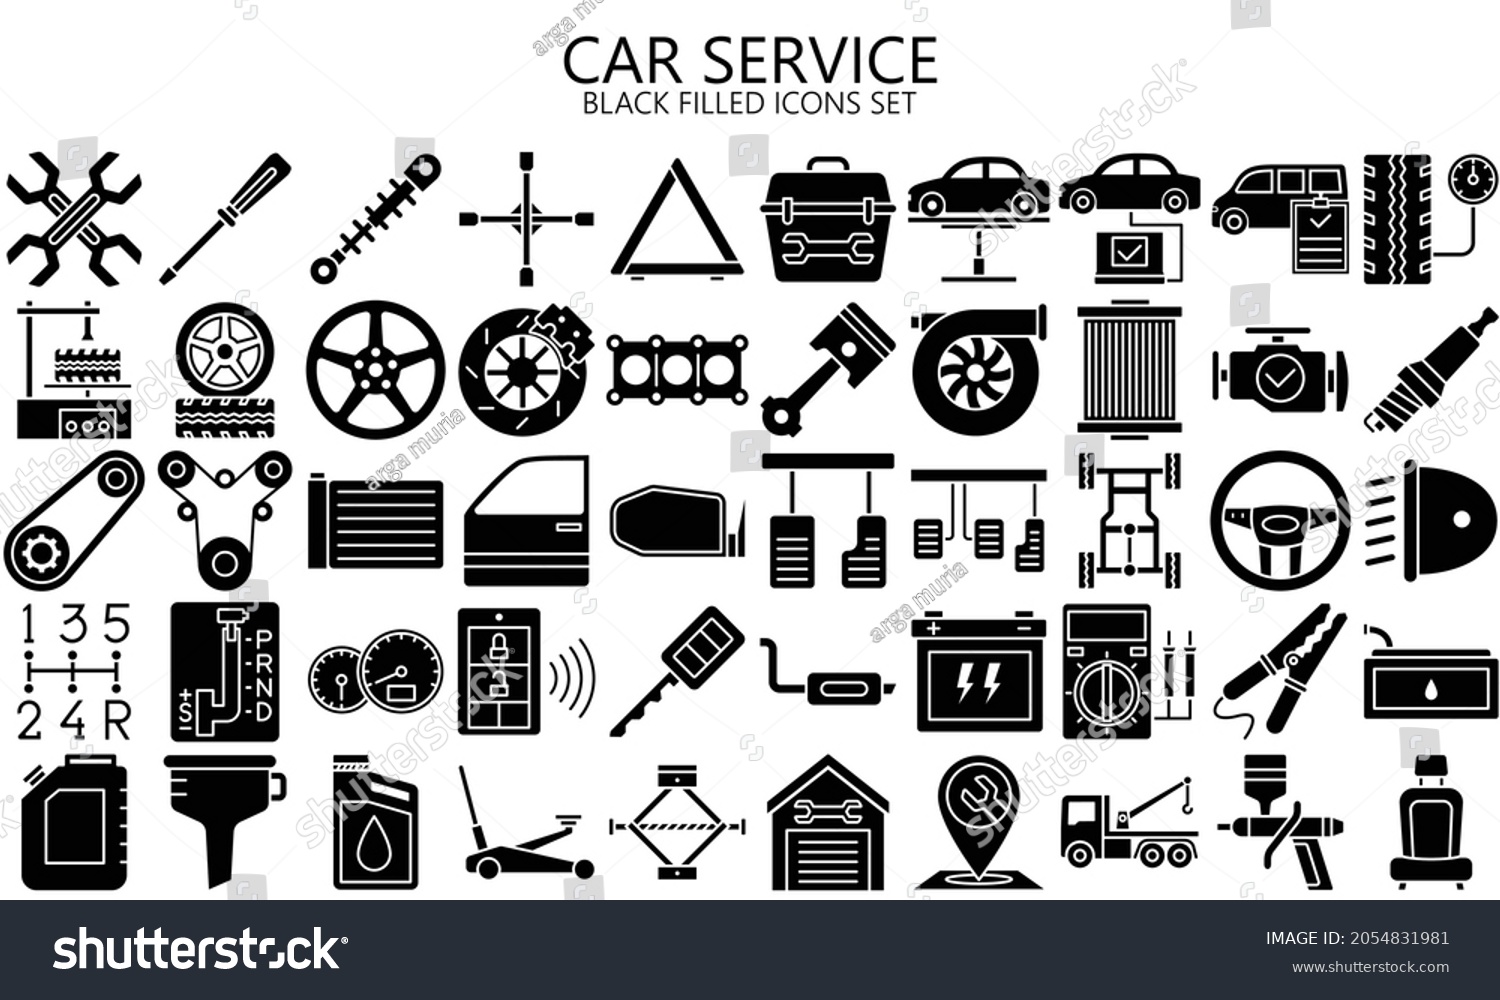 SVG of car service black filled icons set, auto repair and transport. Collection modern elements and symbols. Used for modern concepts, web, UI, UX kit and applications. EPS 10 ready to convert to SVG. svg